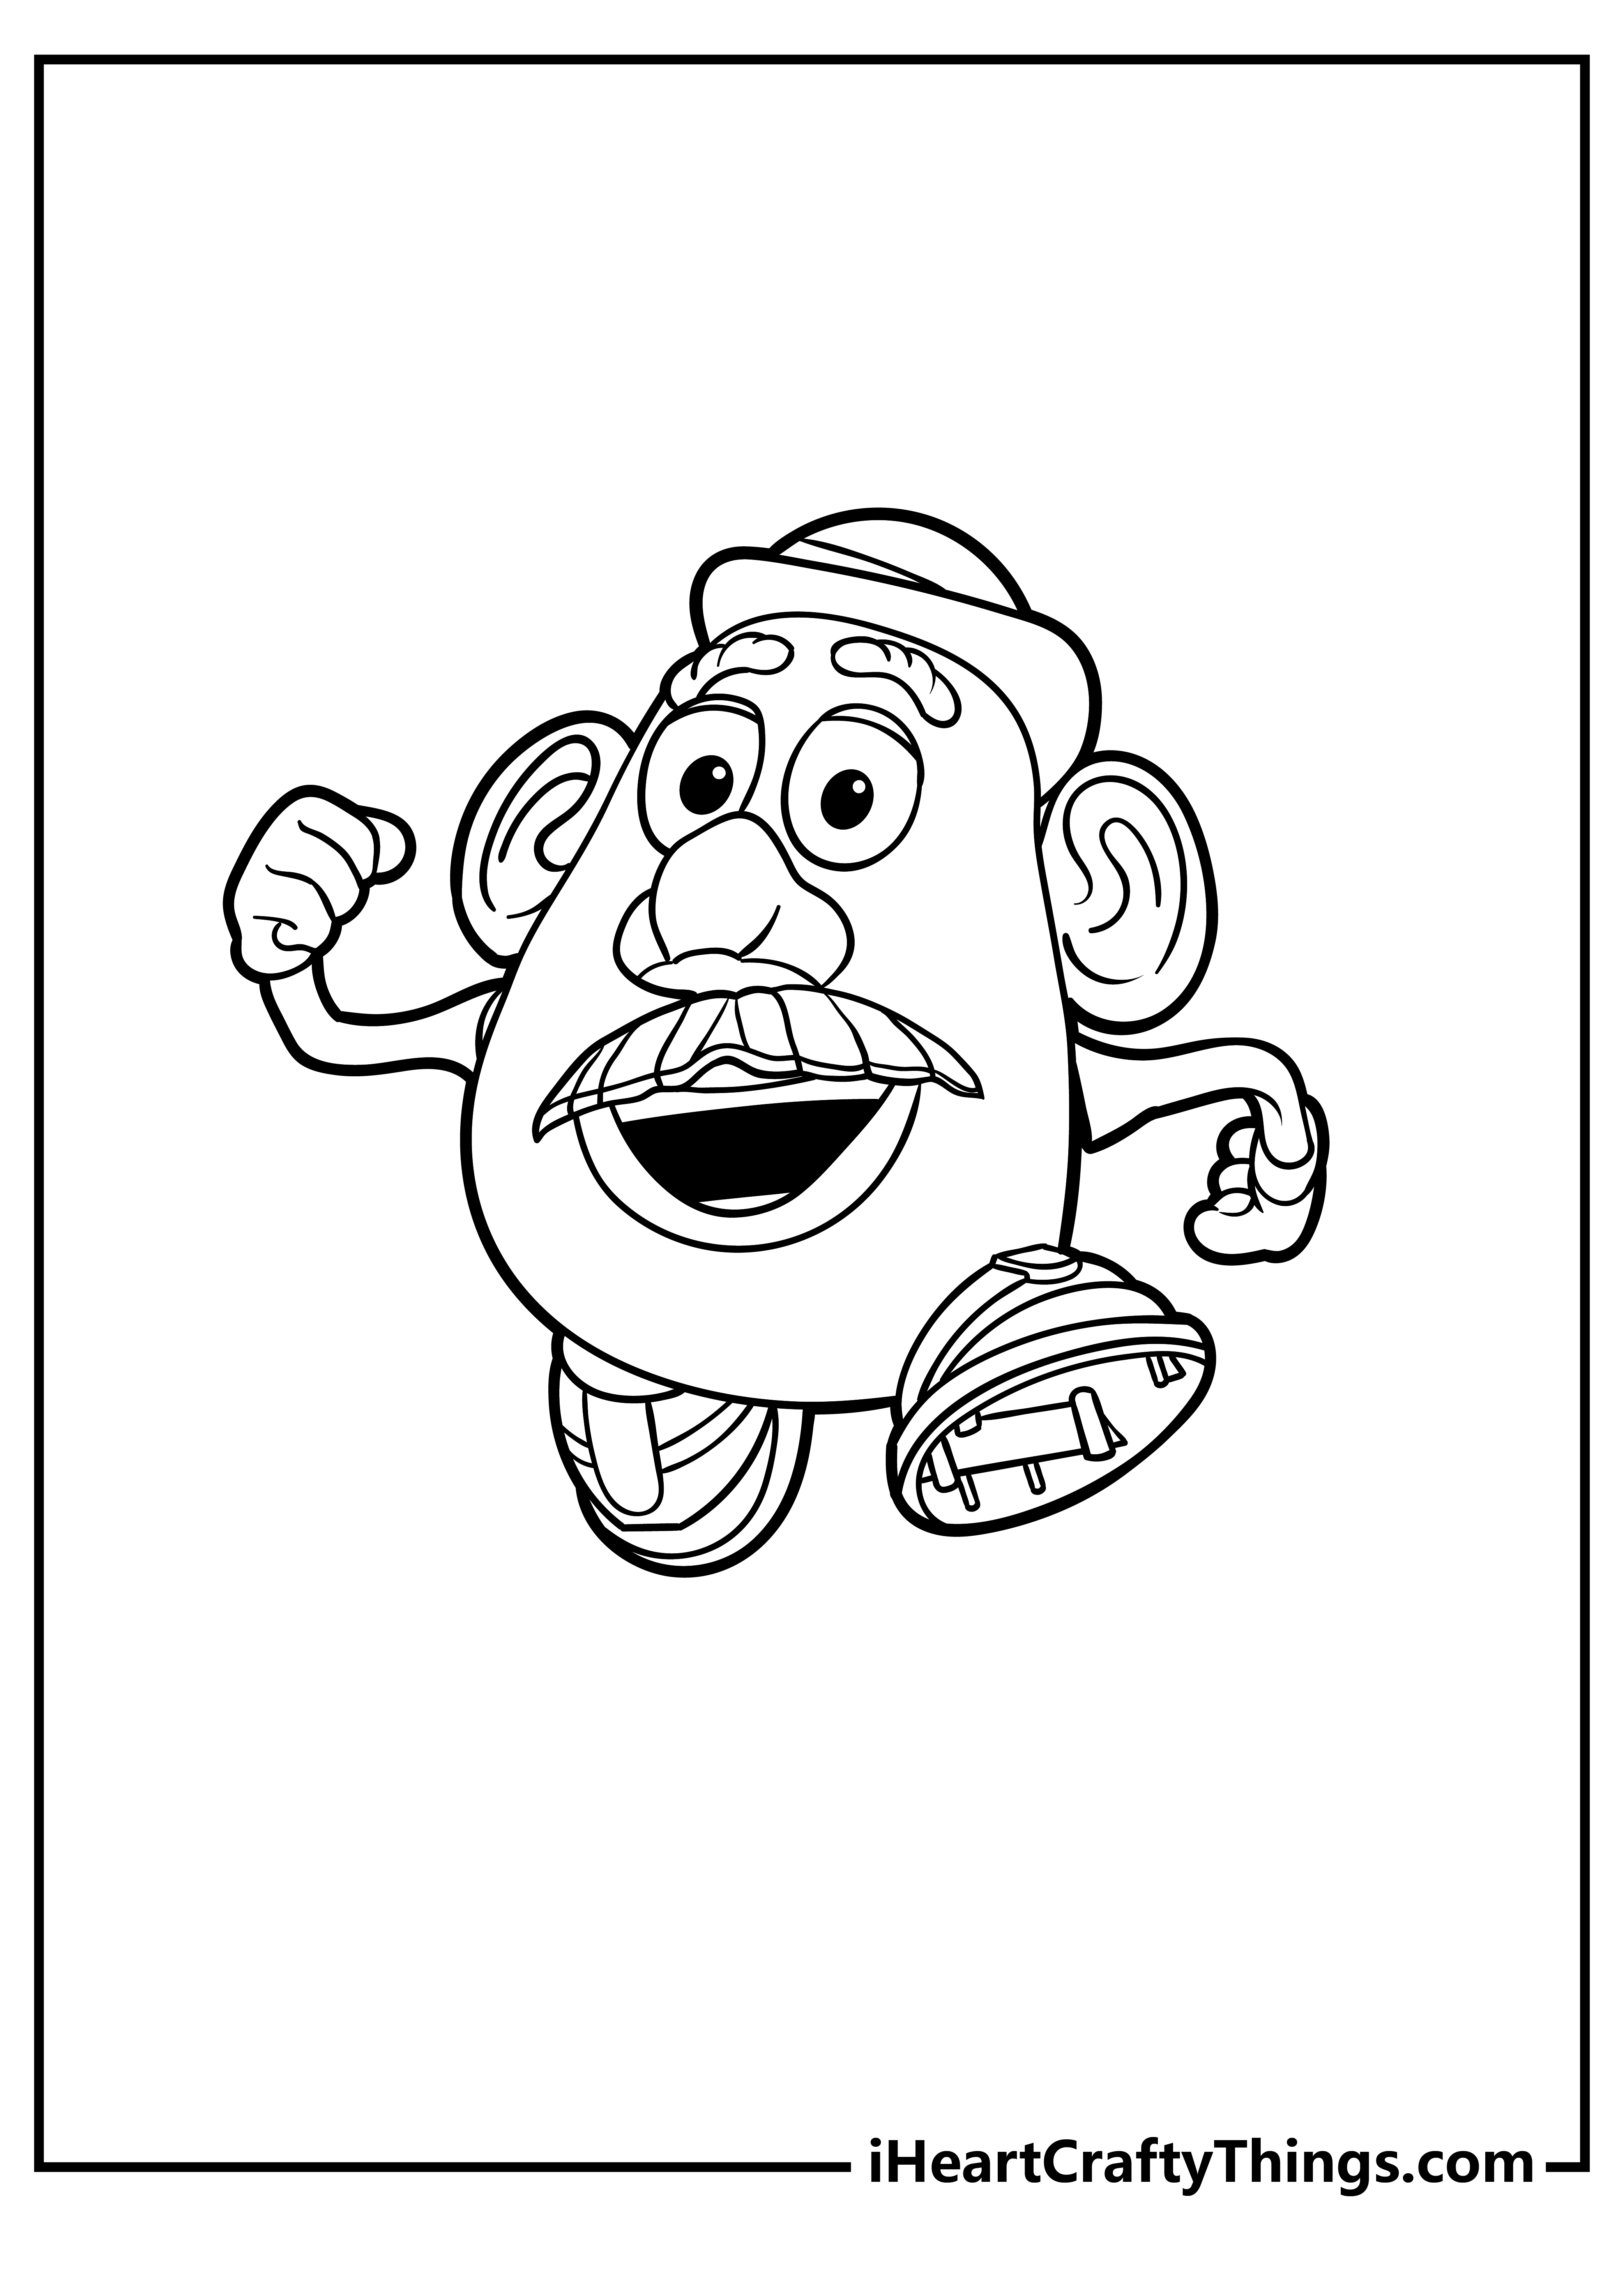 Toy story coloring pages free printables